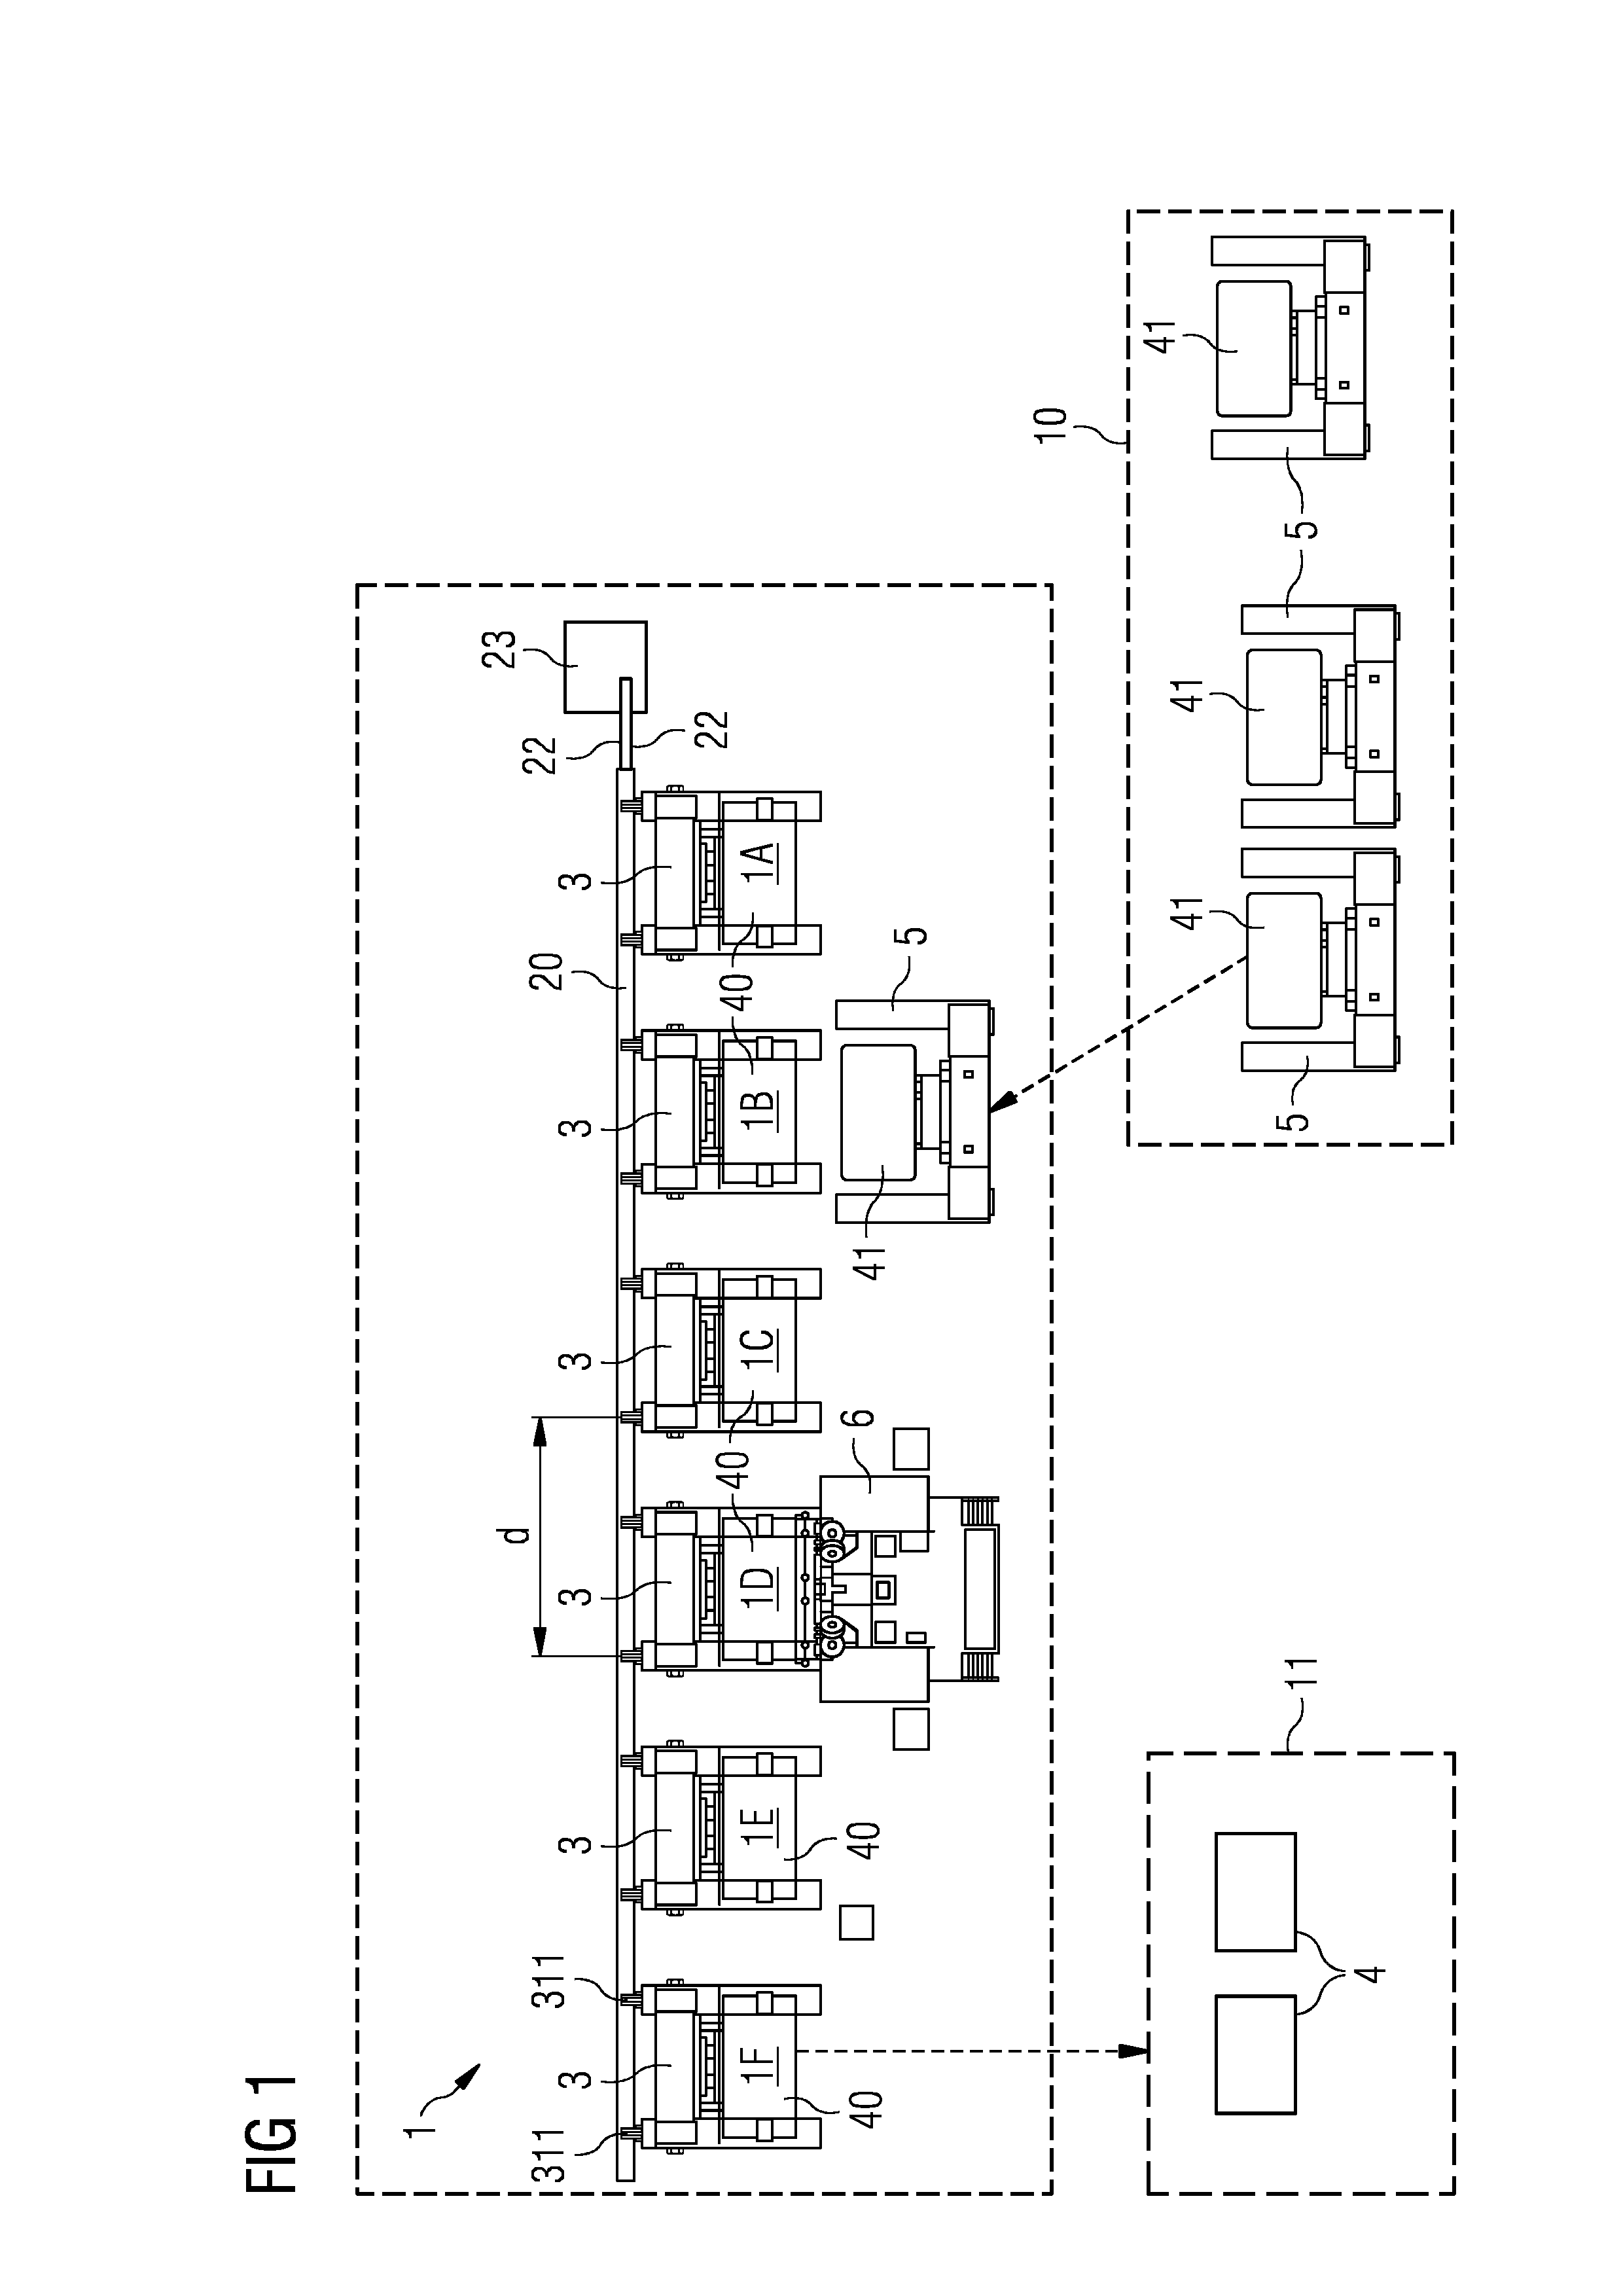 Conveyor apparatus for an assembly line